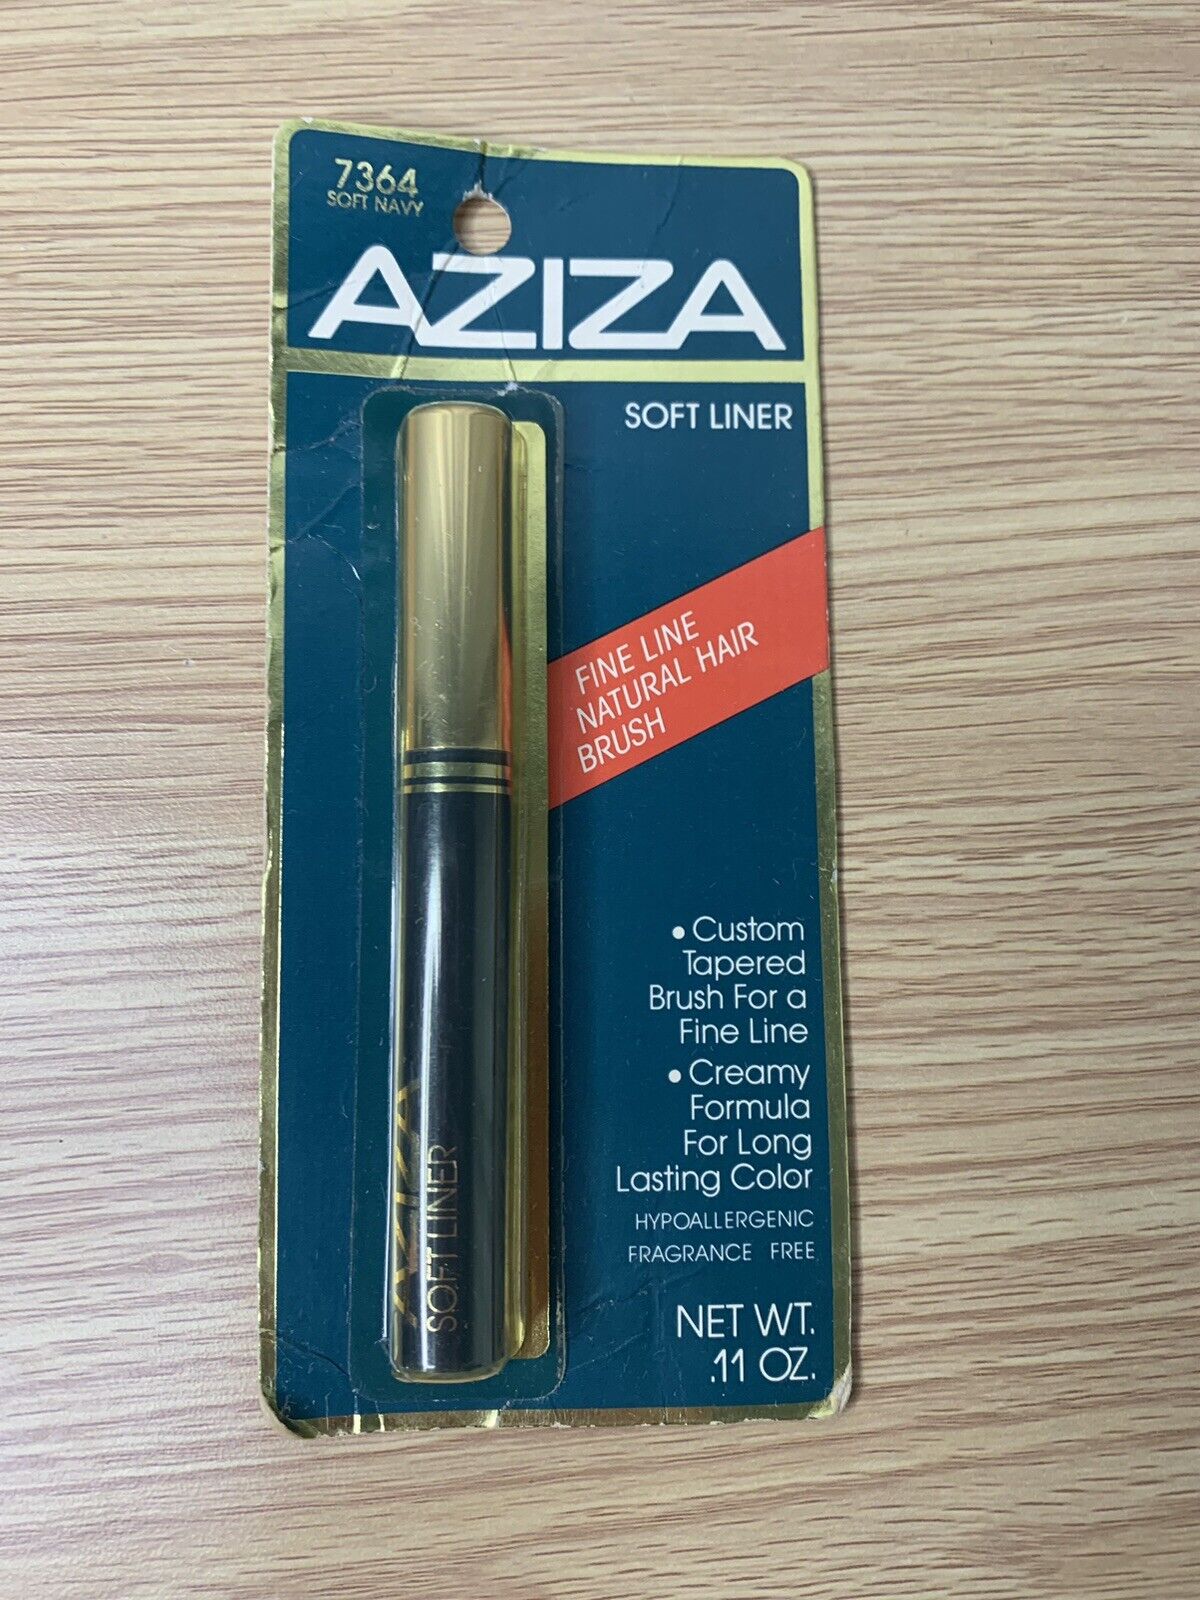 Vintage 80s Aziza Soft Eyeliner 7364 Soft Navy Rare Find New In Package